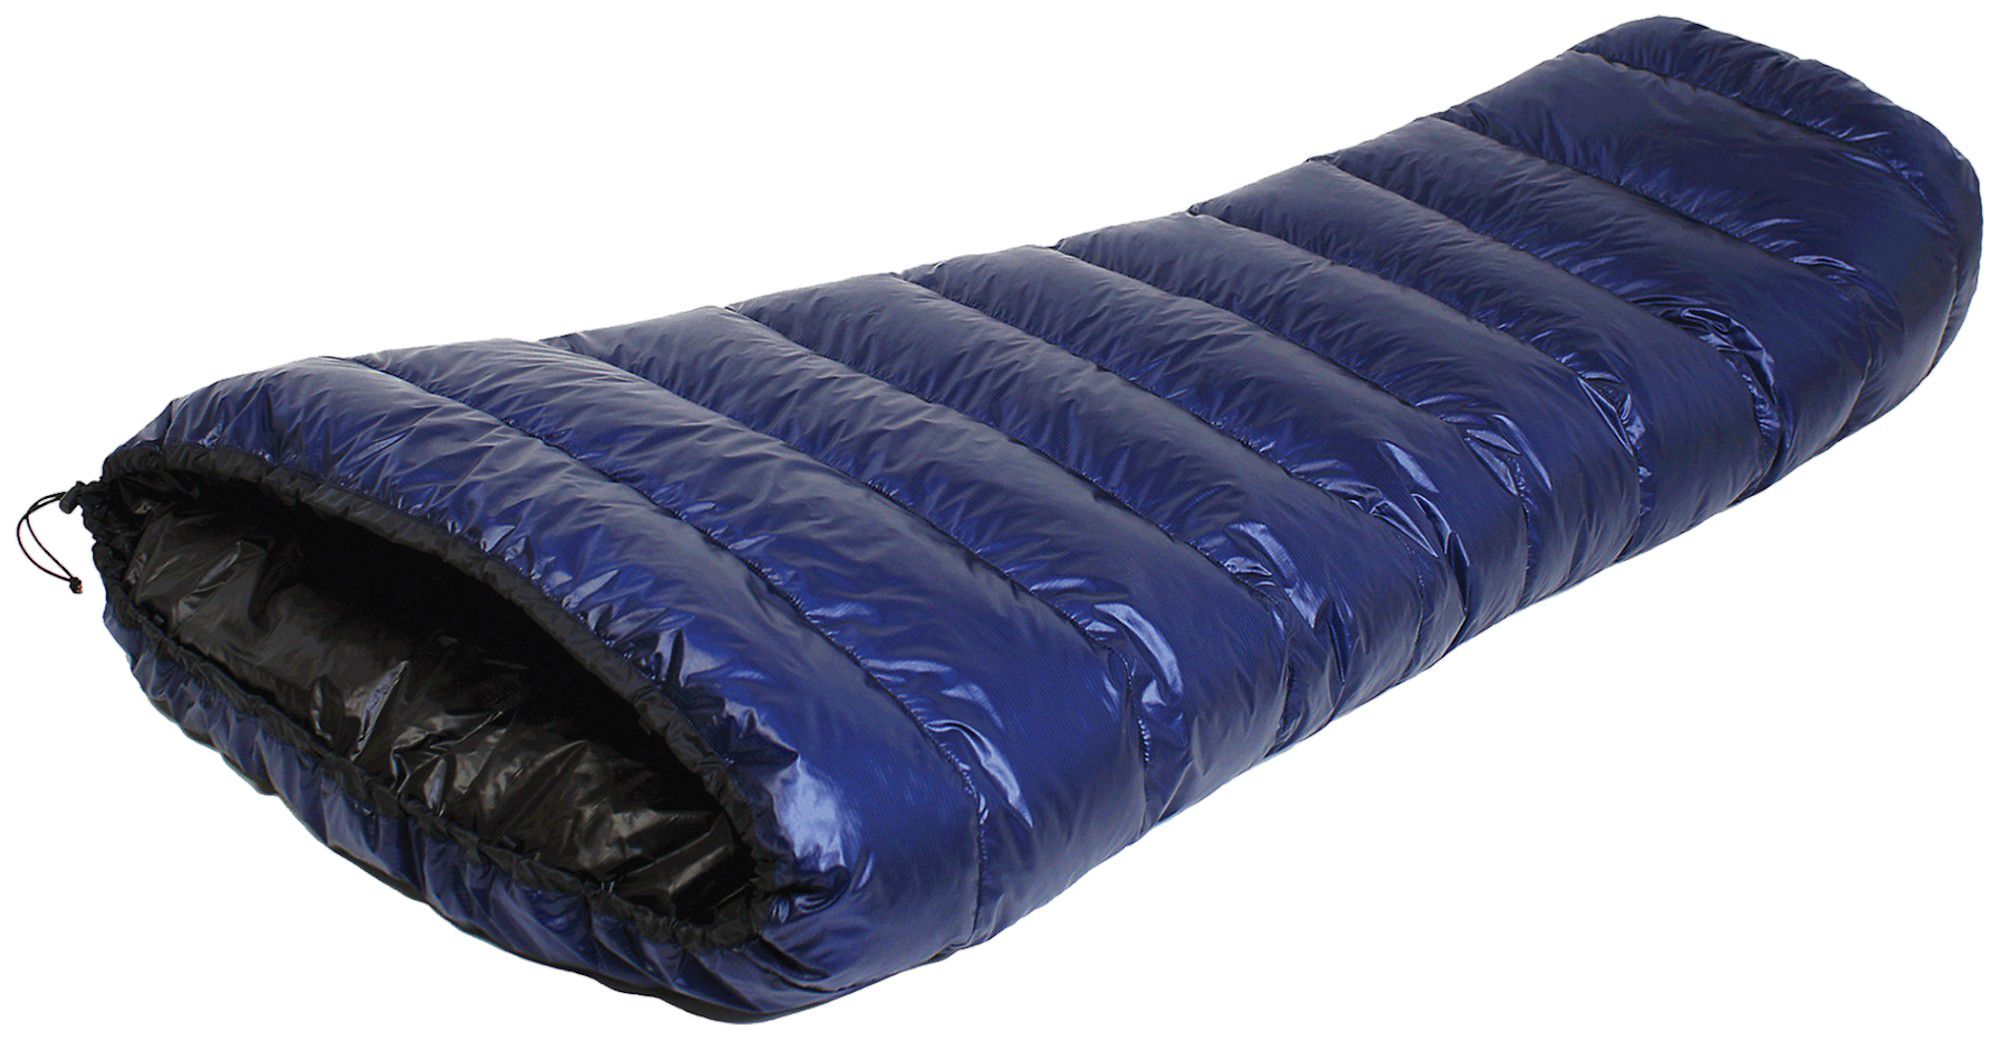 Photos - Suitcase / Backpack Cover Western Mountaineering Semilite Sleeping Bag, Men's, Navy Blue/Black | Fat